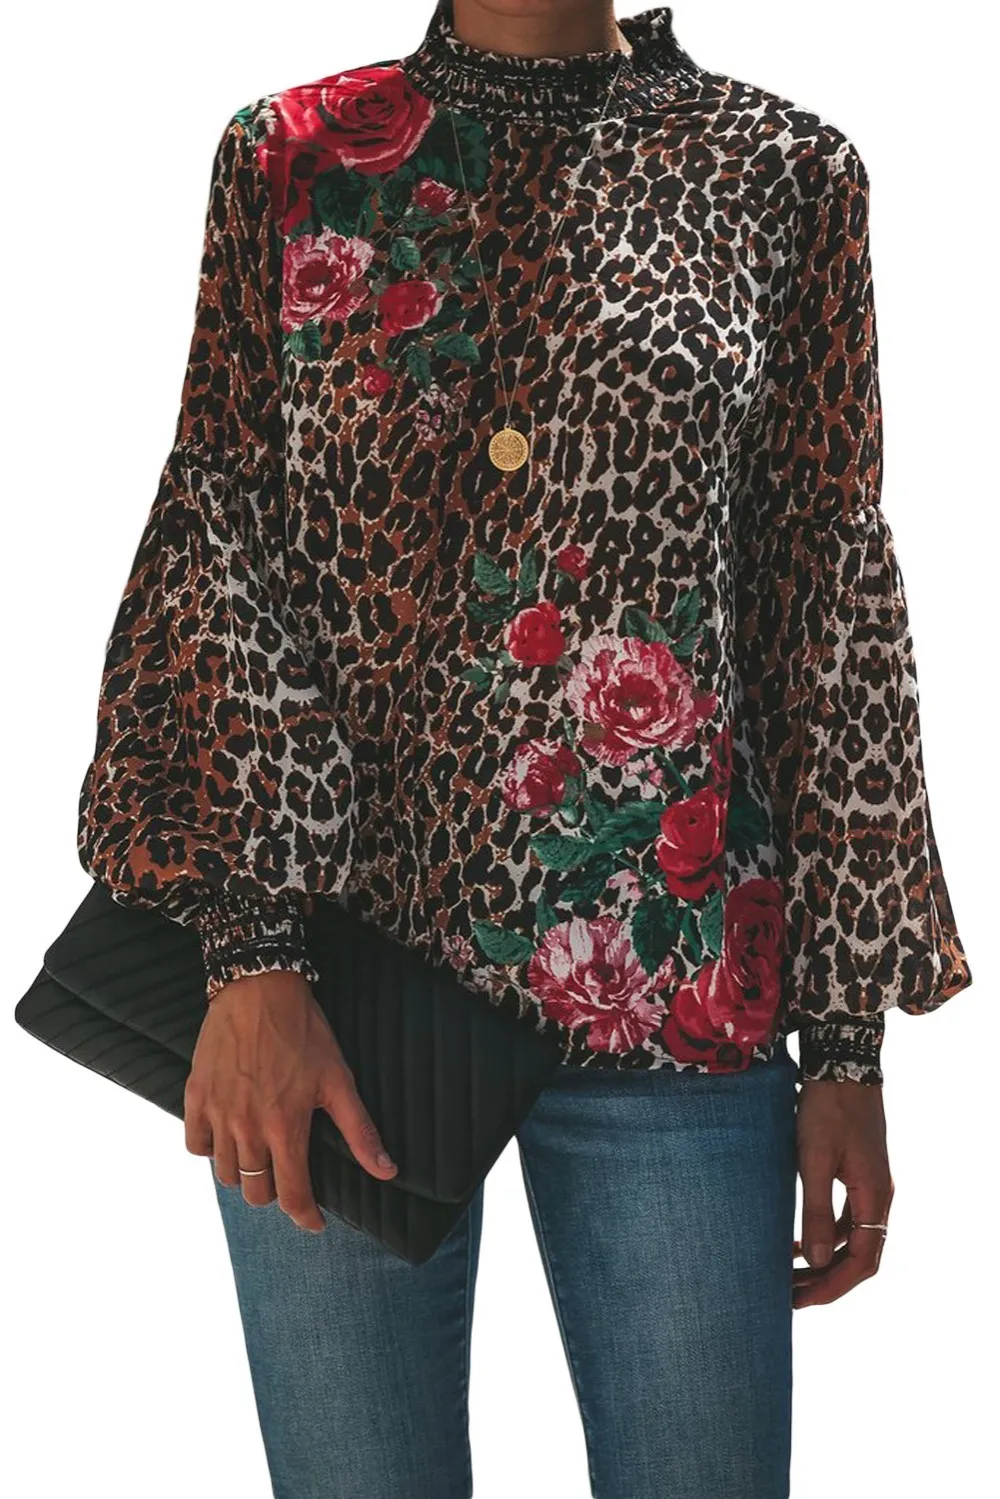 Leopard-Peony-Print-Smocked-Long-Sleeve-Blouse-LC251632-20-1